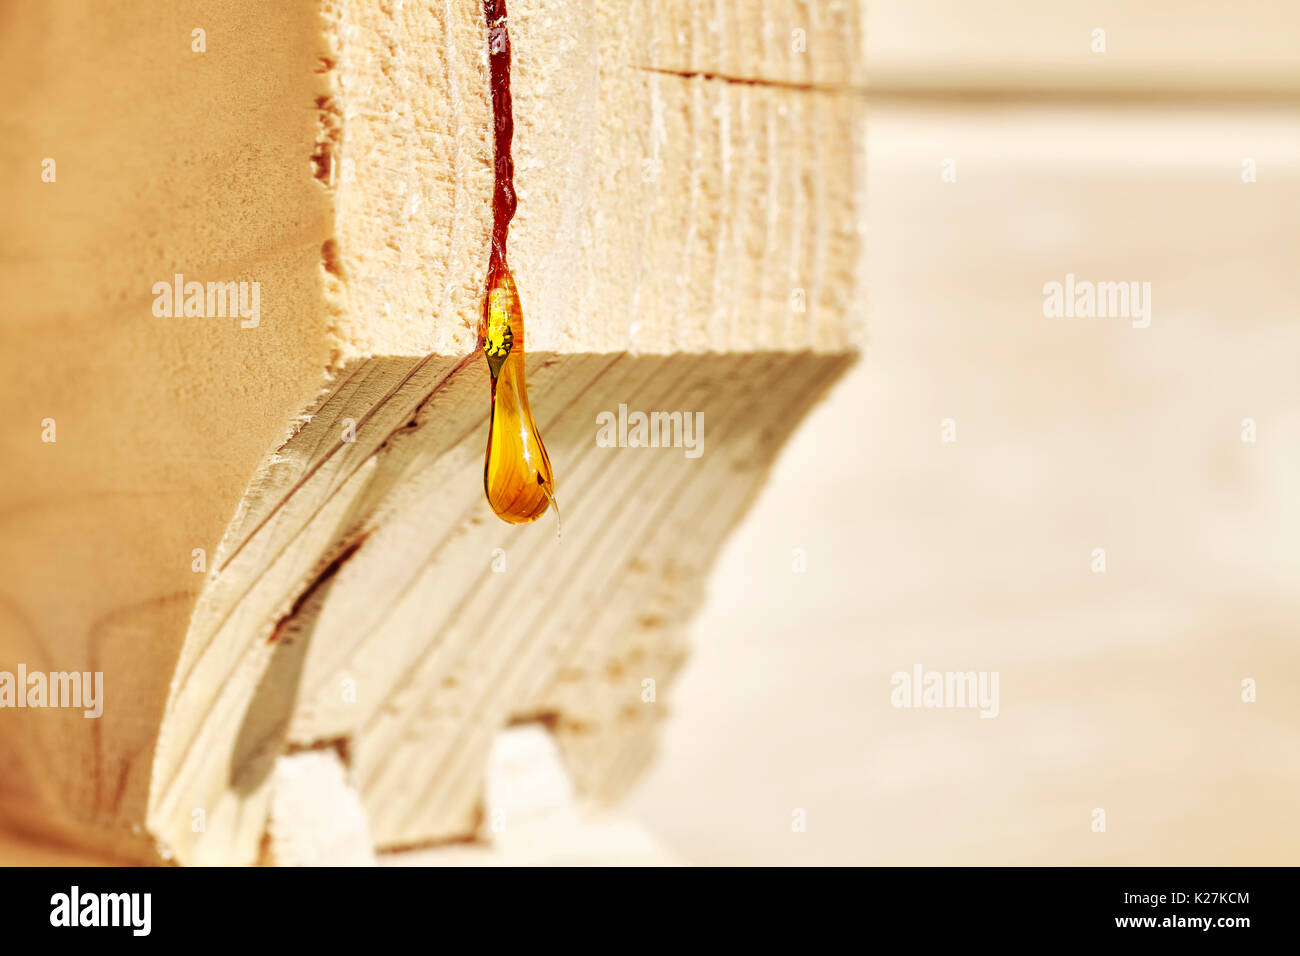 Close up picture of a resin drop on a wood construction, shallow depth of field. Stock Photo